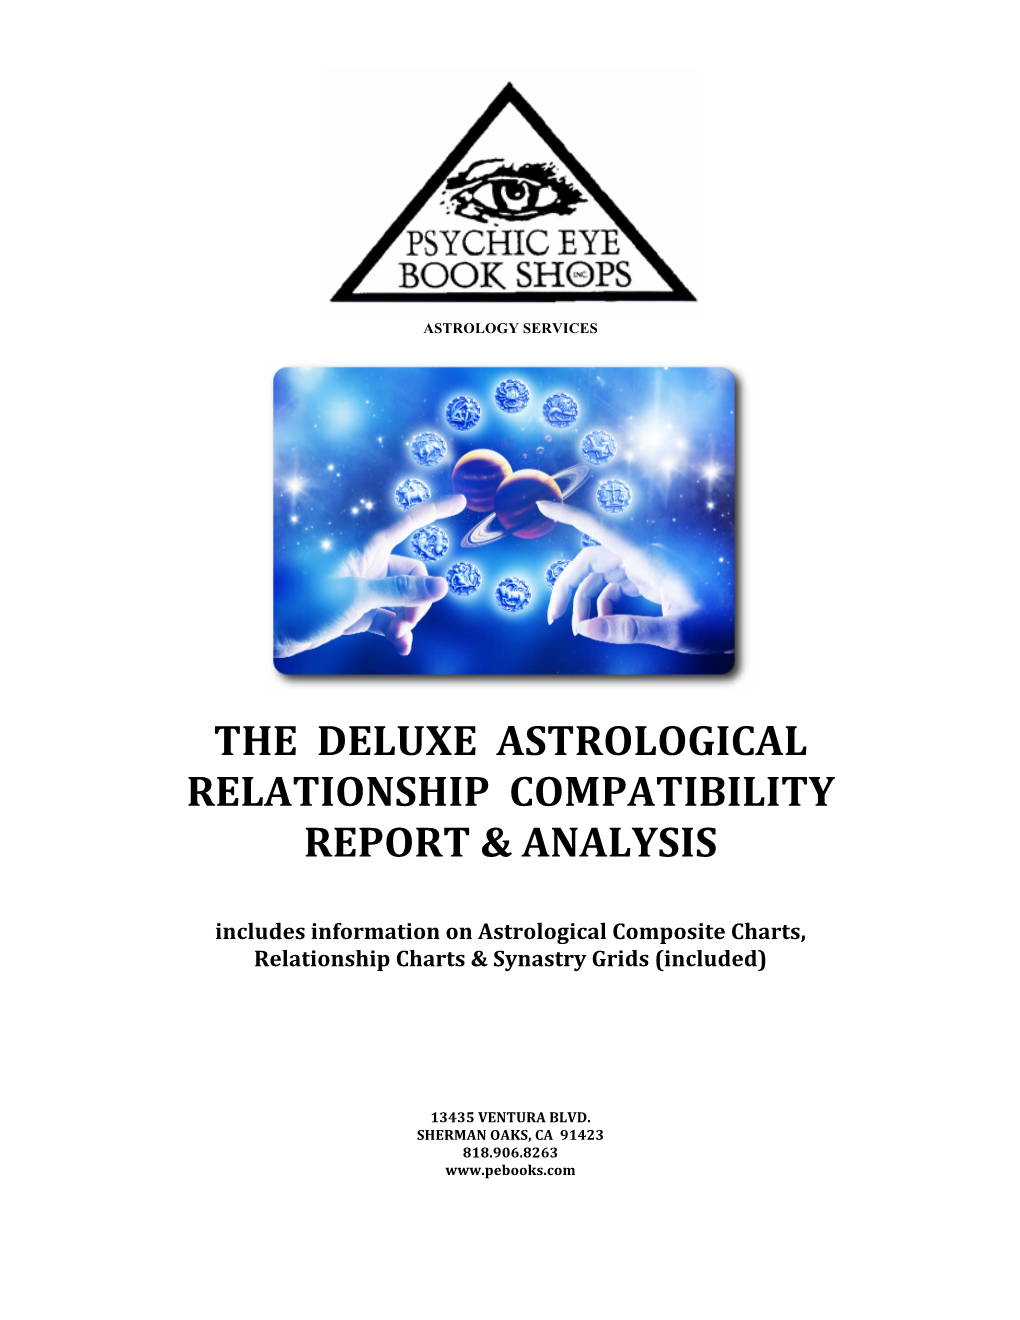 The Deluxe Astrological Relationship Compatibility Report & Analysis